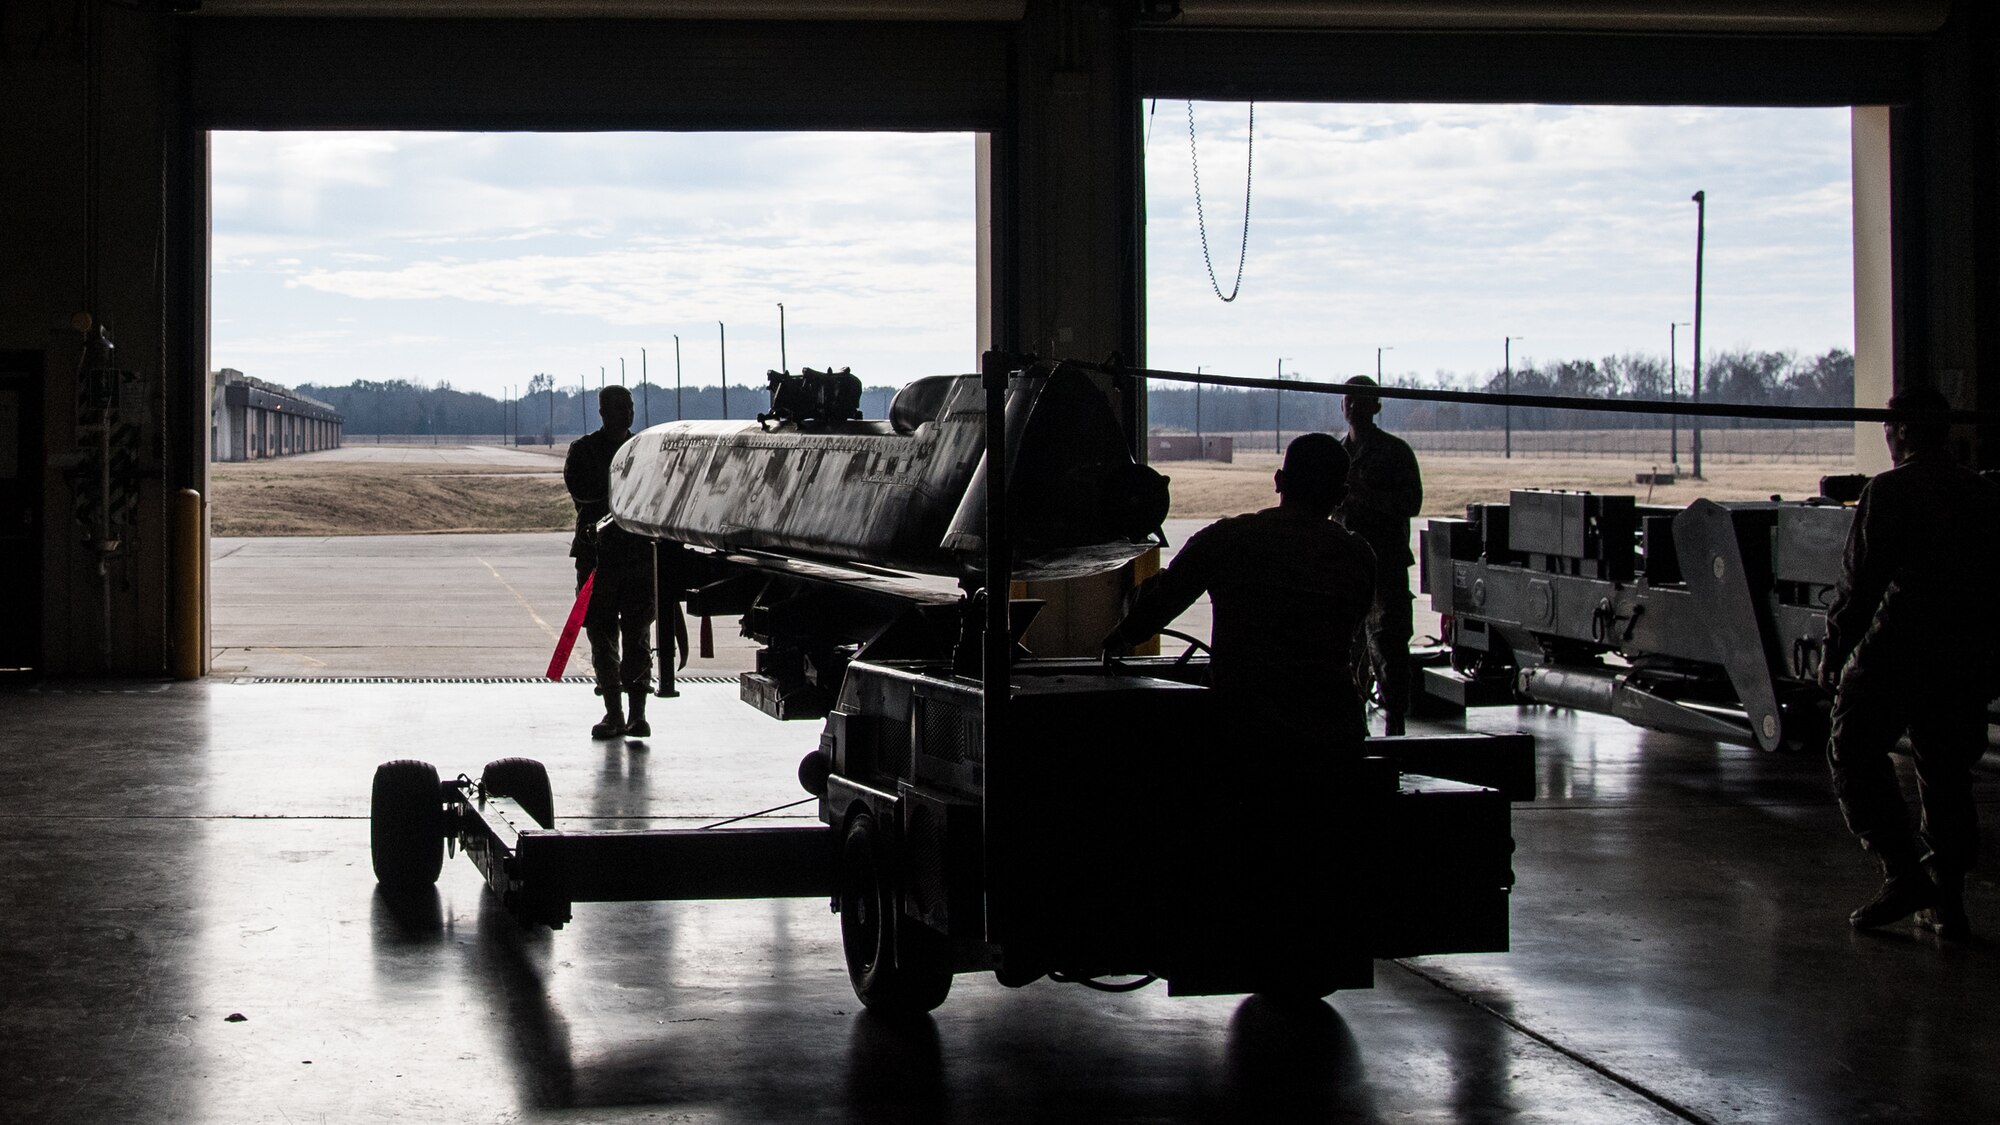 Airmen from the 2nd Munitions Squadron transport the final Conventional Air-launched Cruise Missile (CALCM) to be demilitarized at Barksdale Air Force Base, La., Nov. 20, 2019. The CALCM missile package was first operationally used in 1991 during Operation Secret Squirrel. (U.S. Air Force photo by Airman 1st Class Jacob B. Wrightsman)